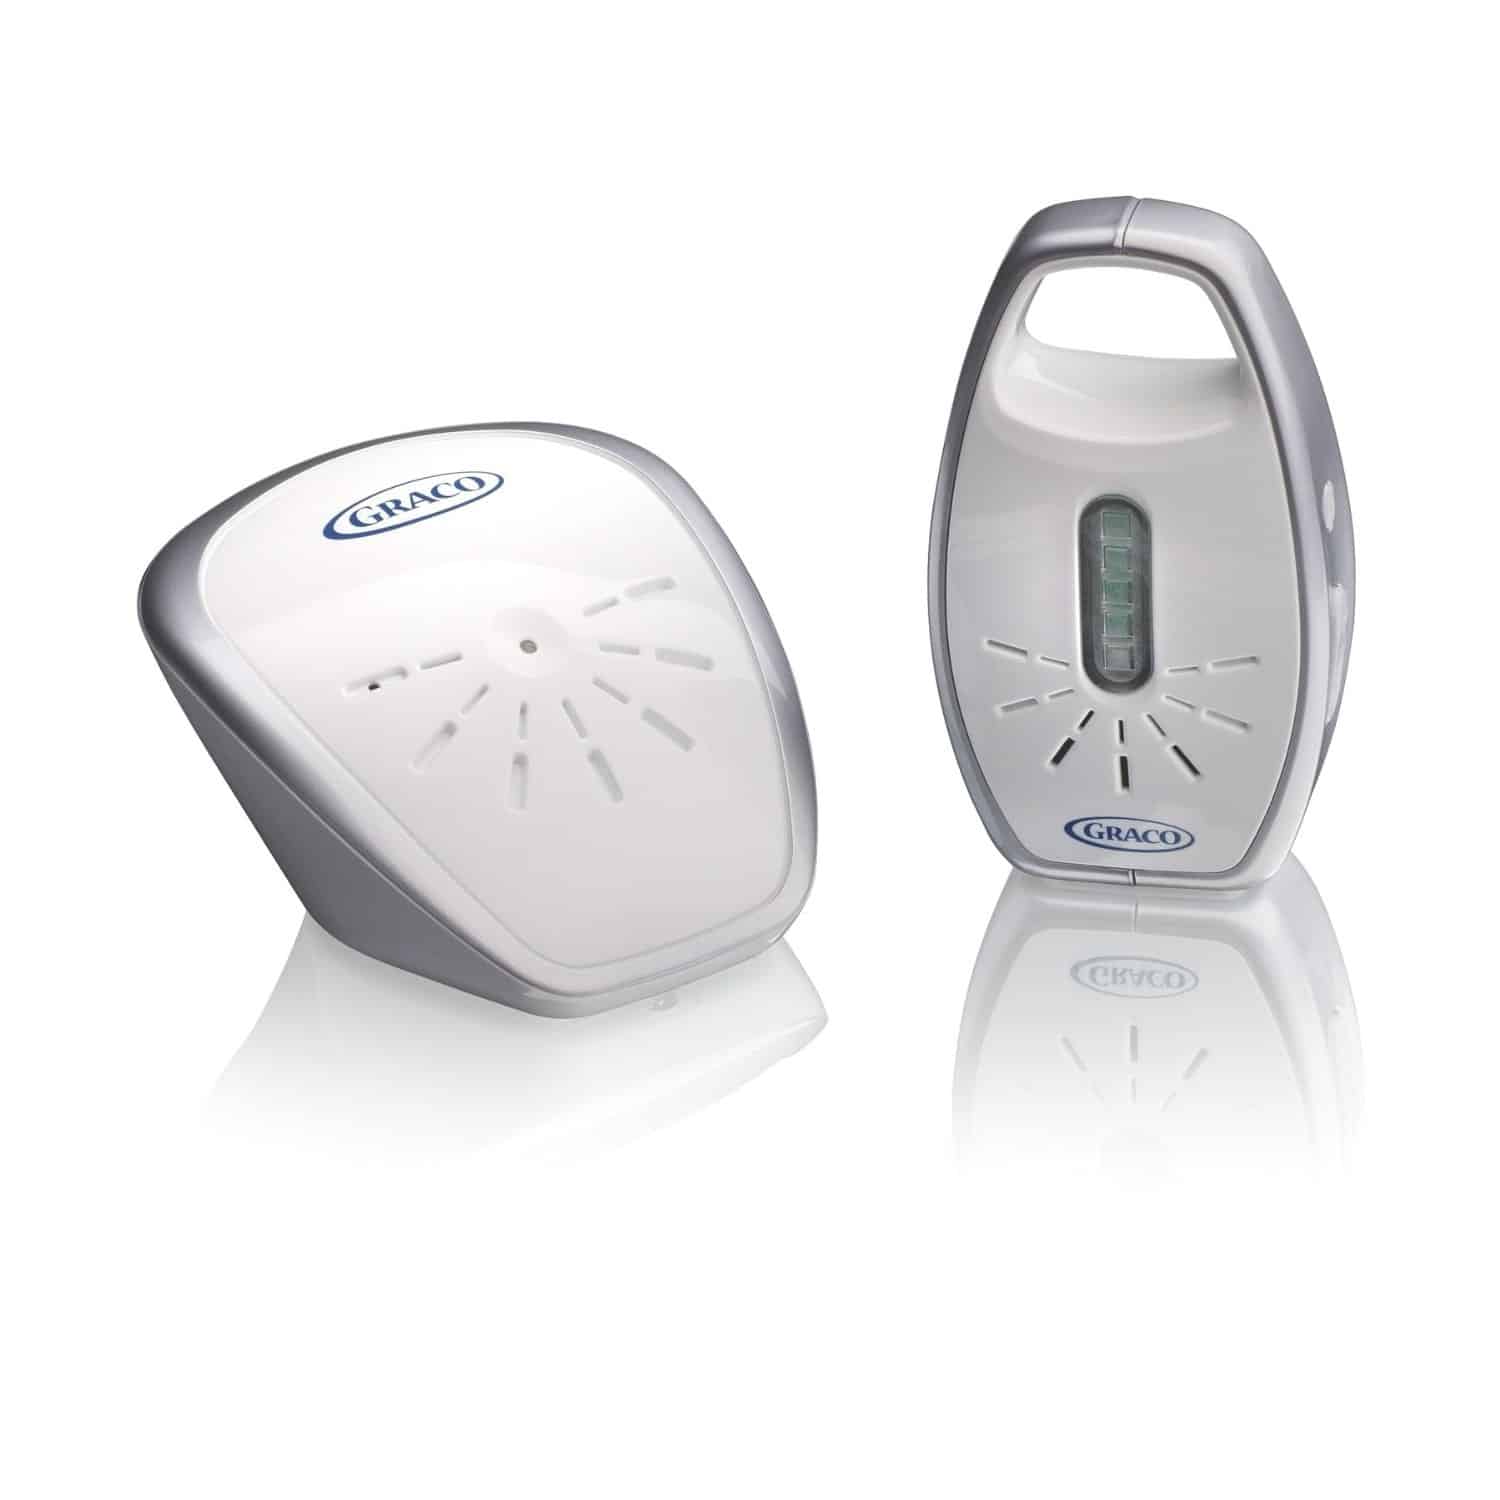 graco direct connect baby monitor